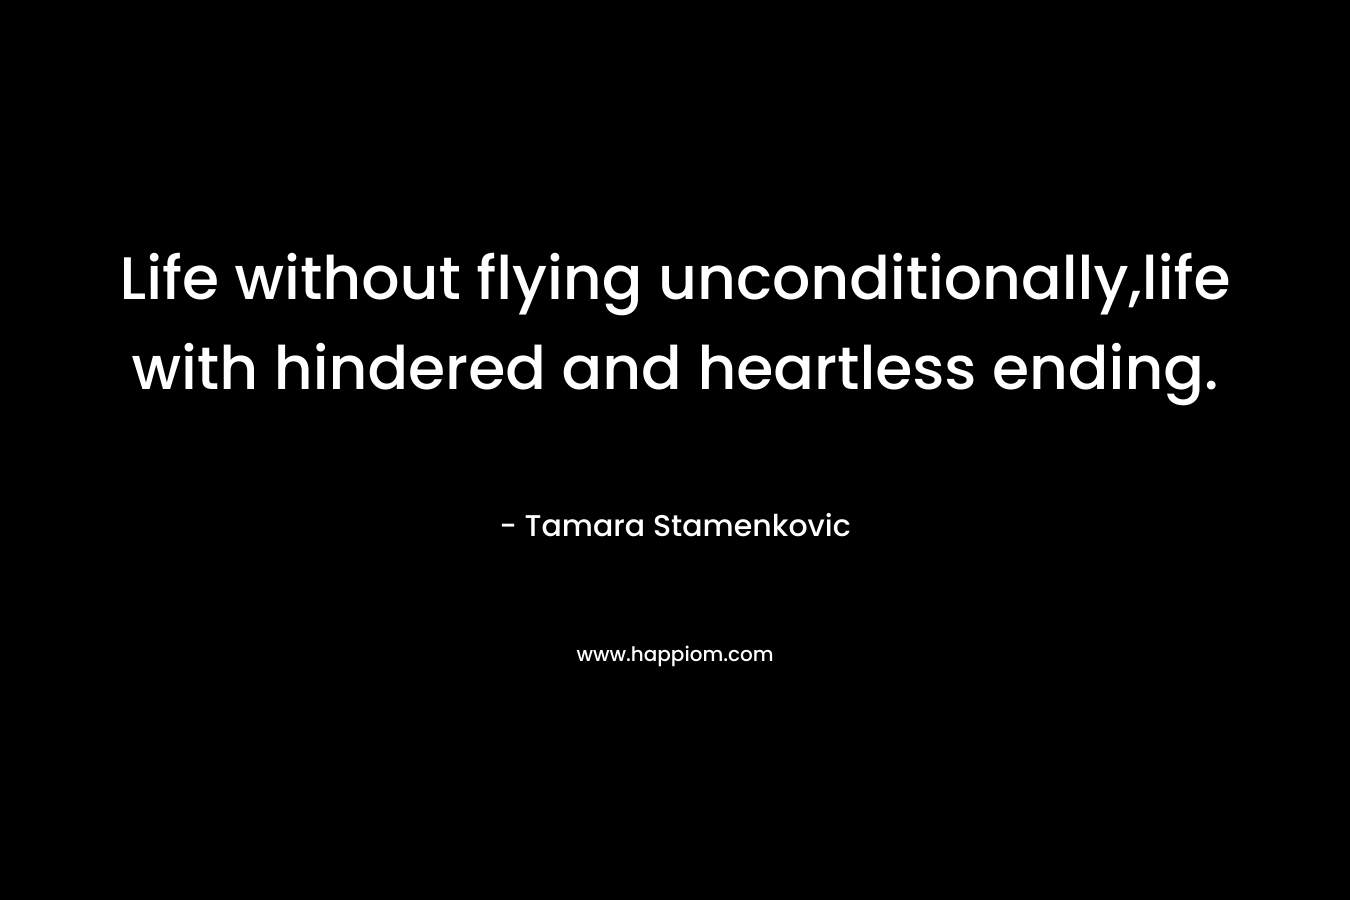 Life without flying unconditionally,life with hindered and heartless ending.